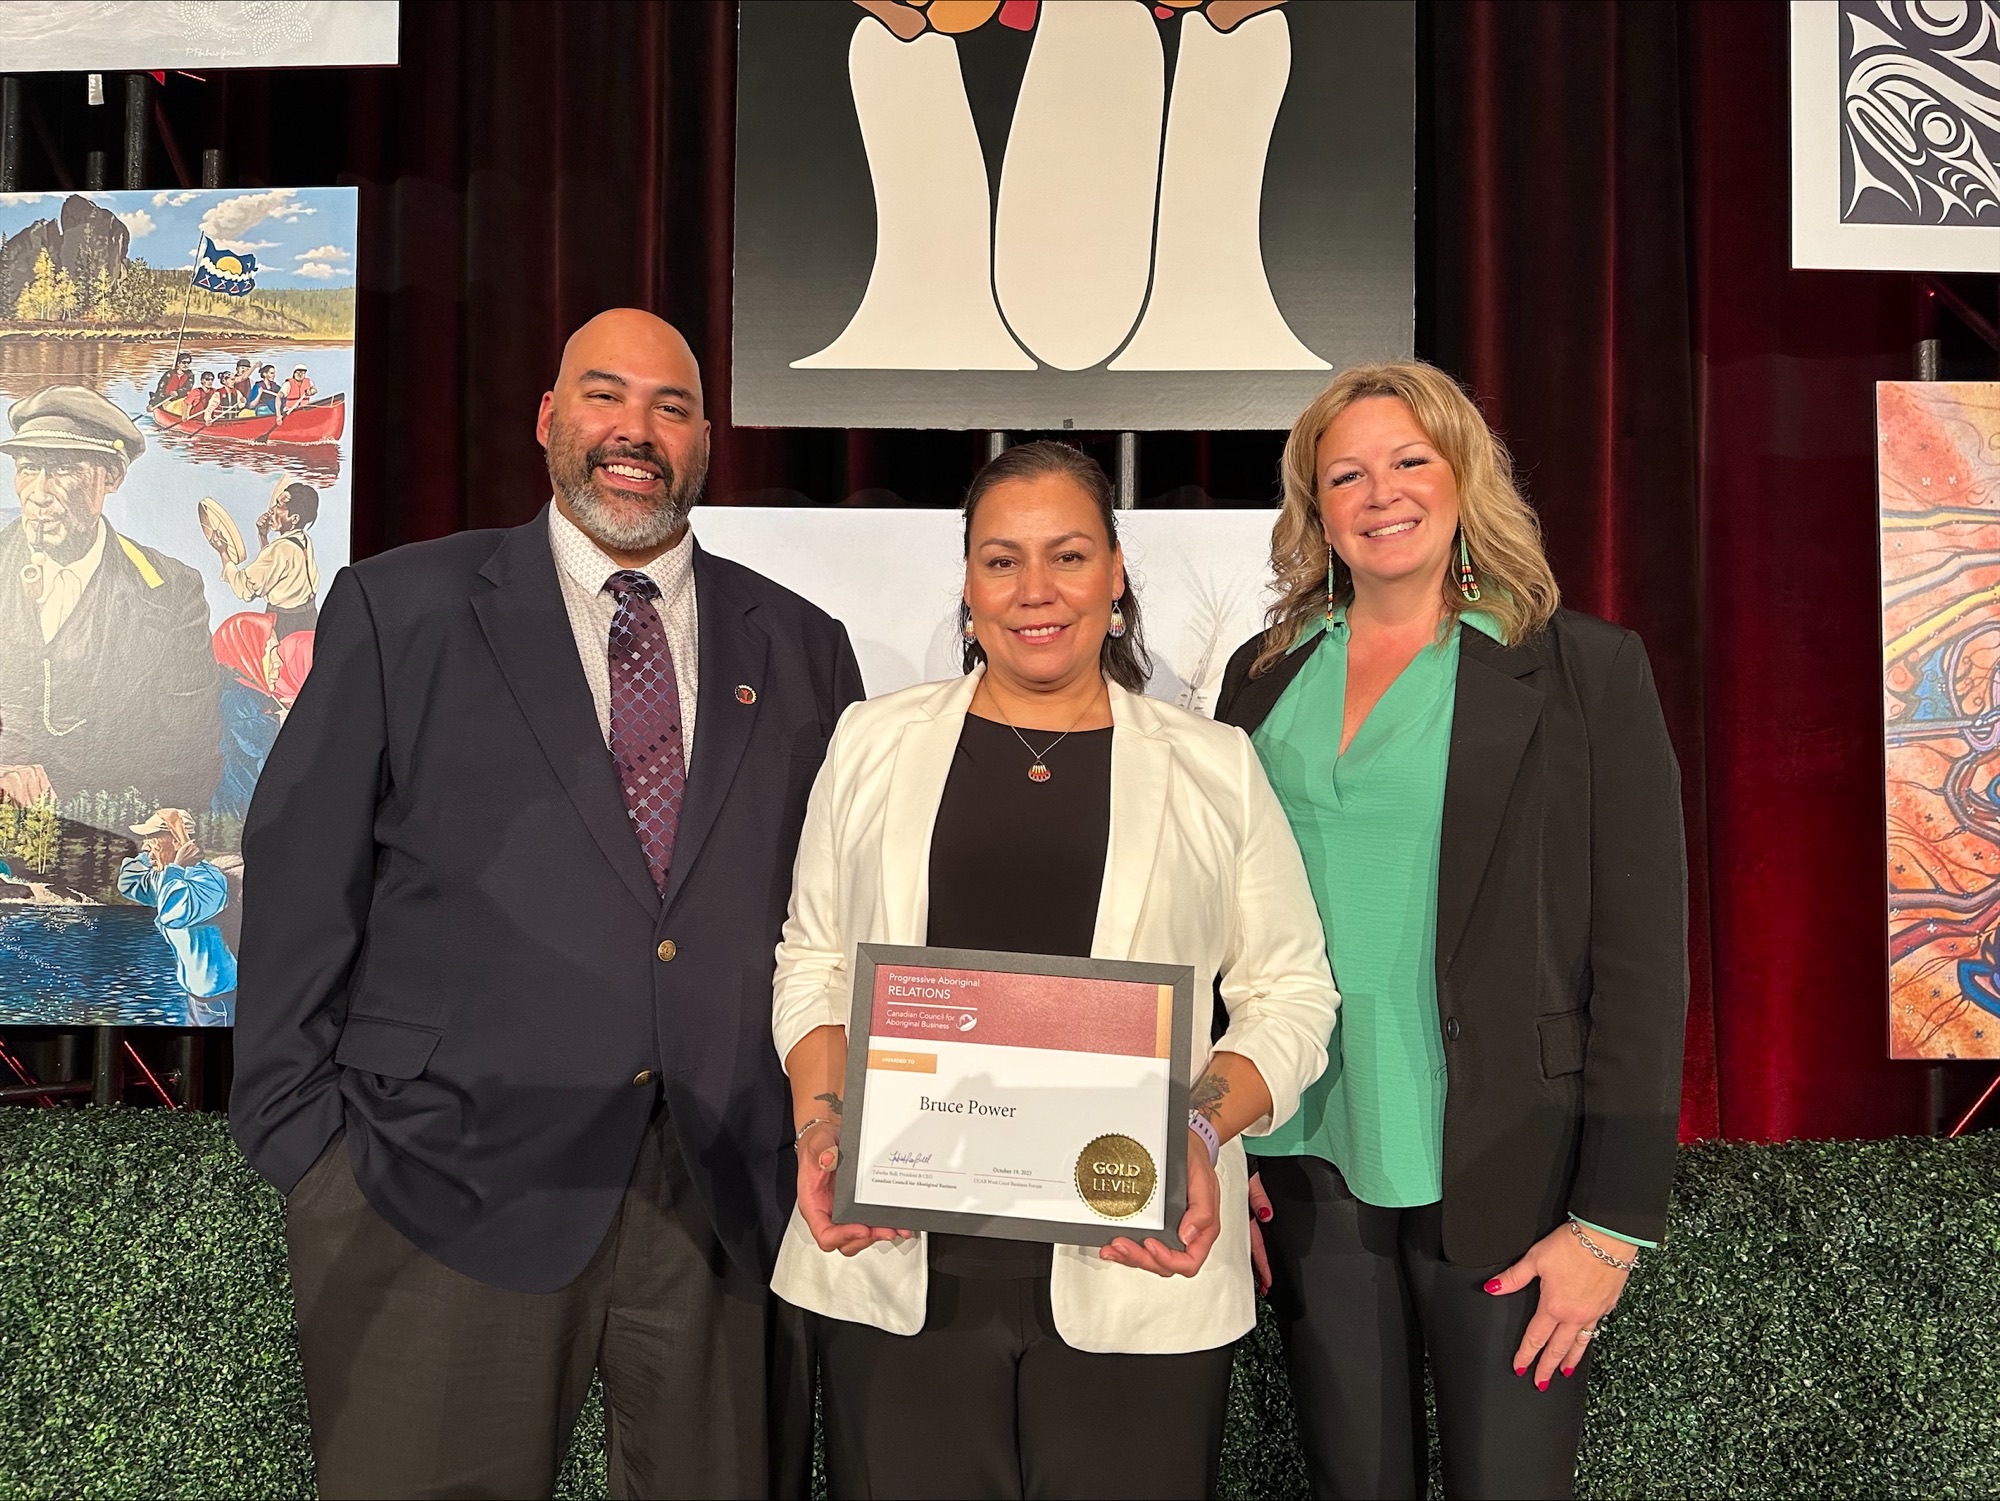 Bruce Power Director of Indigenous Relations & Business Partnerships Adam Kahgee, along with Marsha Roote and Alison Fernandes, were on hand to accept the company’s Gold level certification from the Canadian Council for Aboriginal Business (CCAB) Oct. 19 in Vancouver.